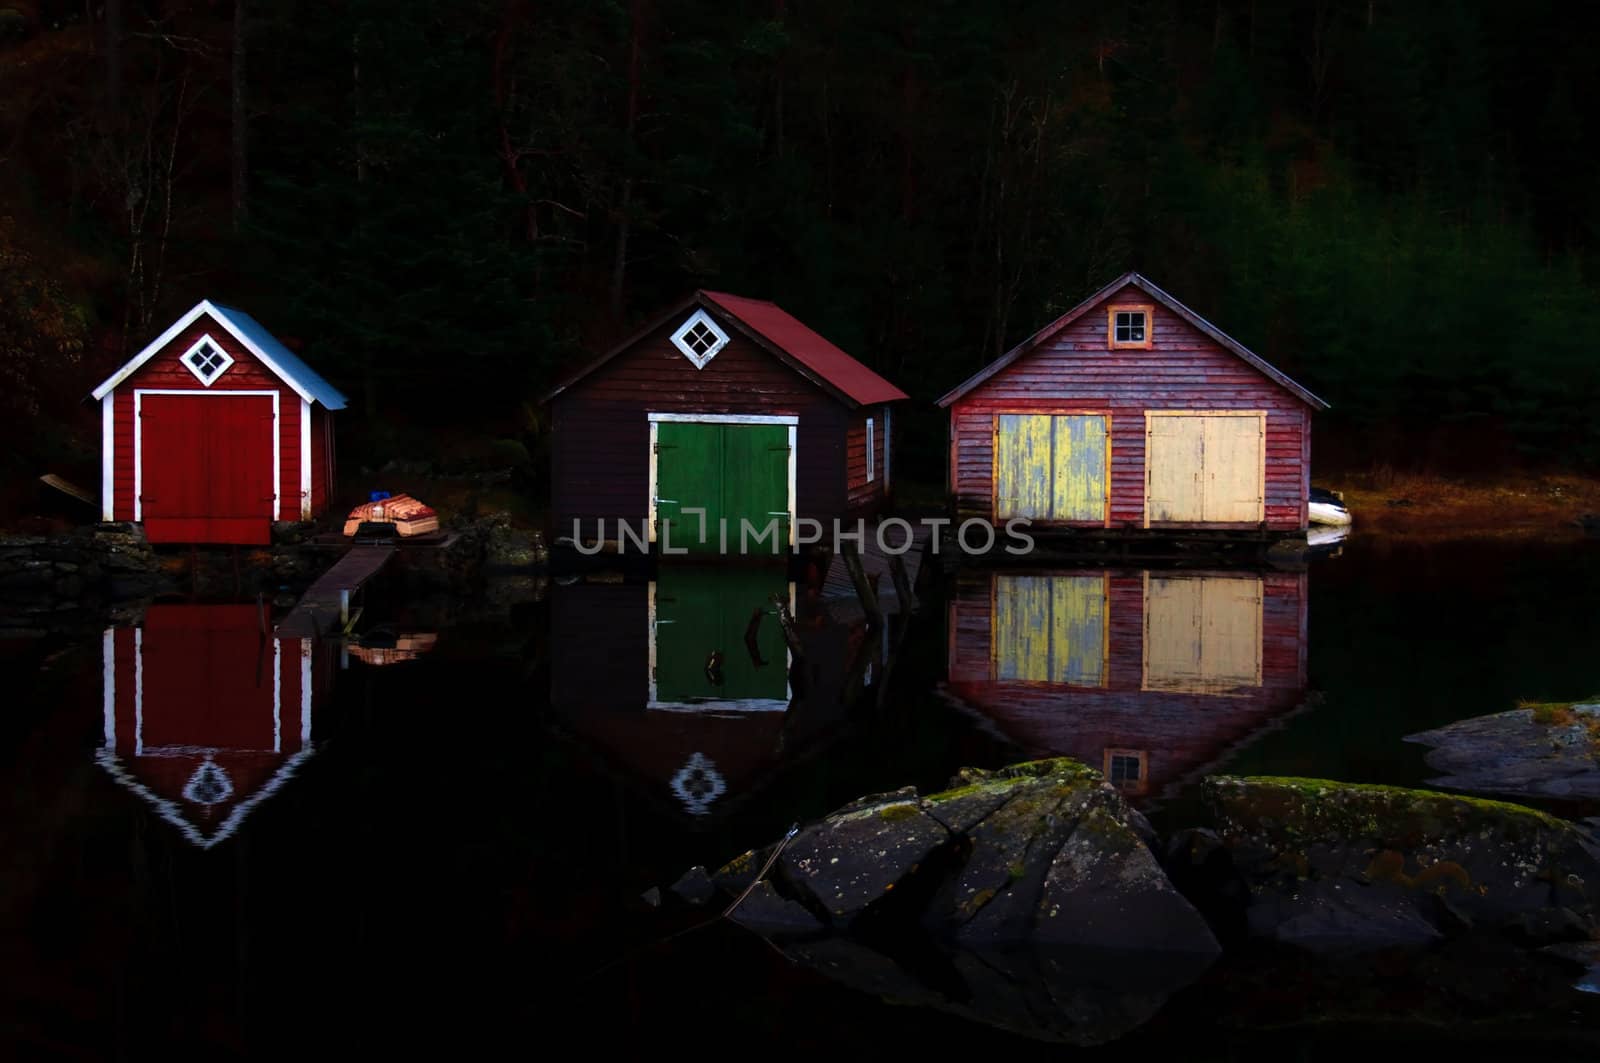 Boathouses in the evening by GryT